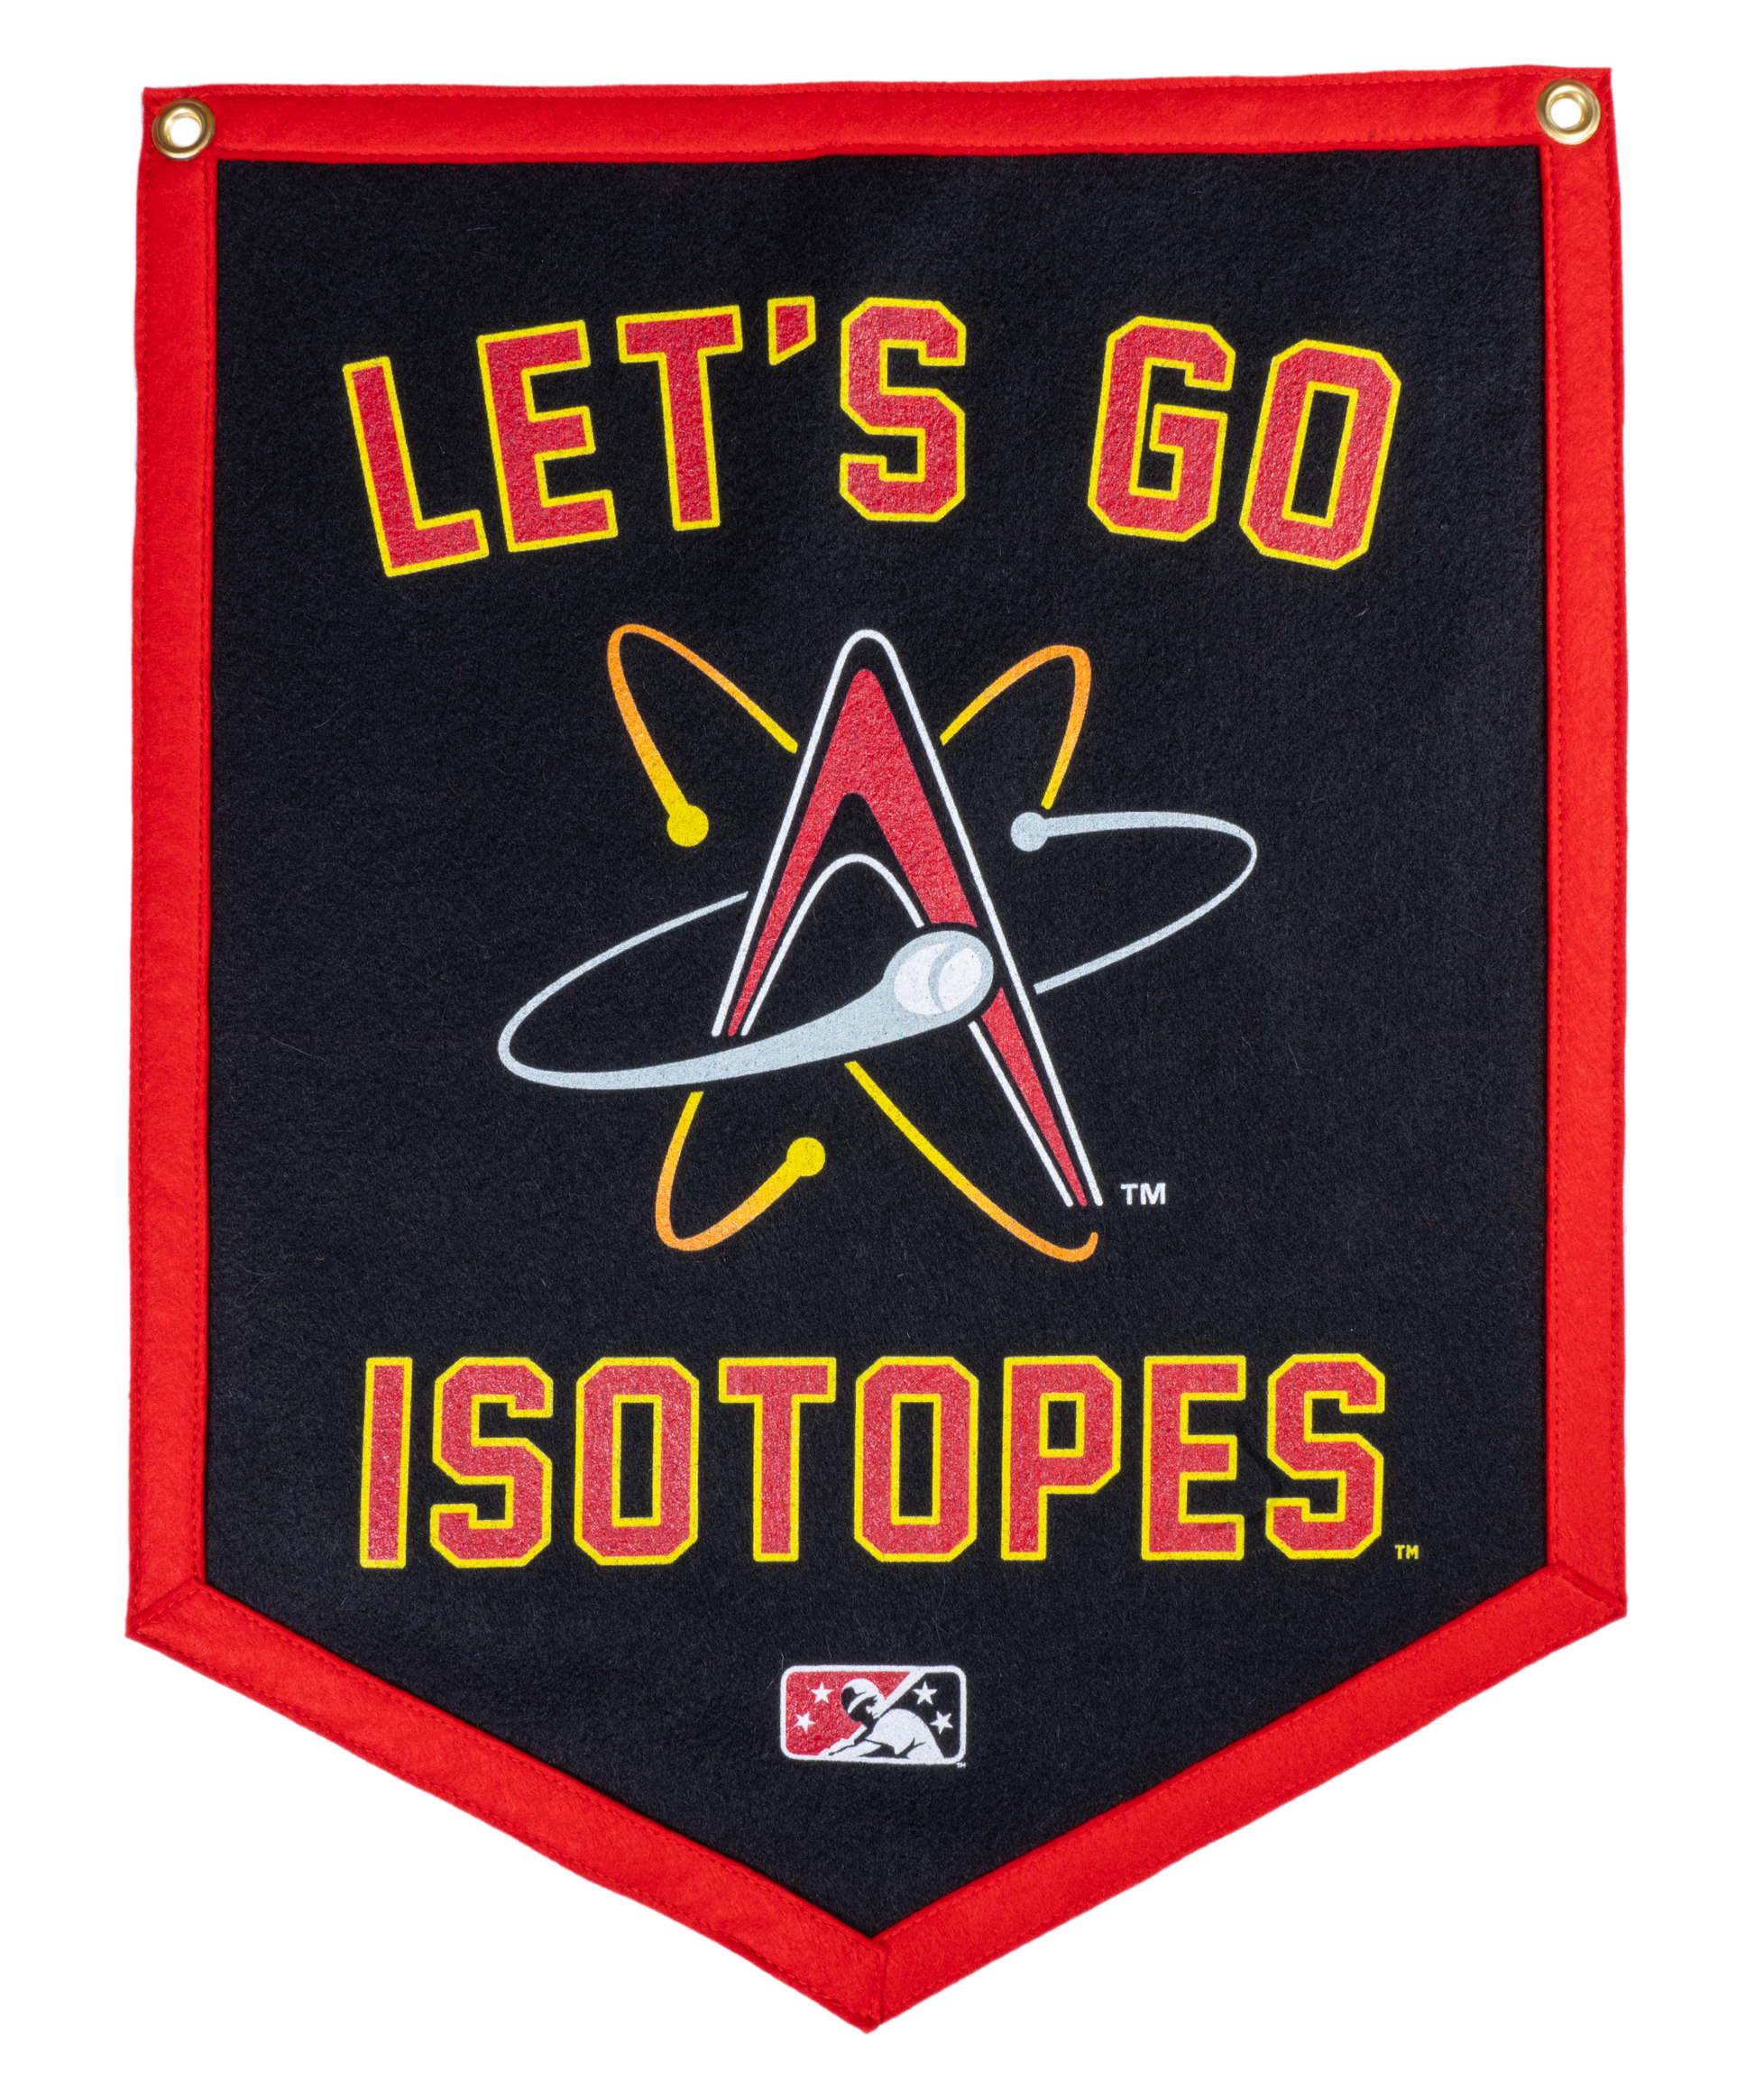 Let's Go Isotopes Camp Flag | MiLB x Oxford Pennant